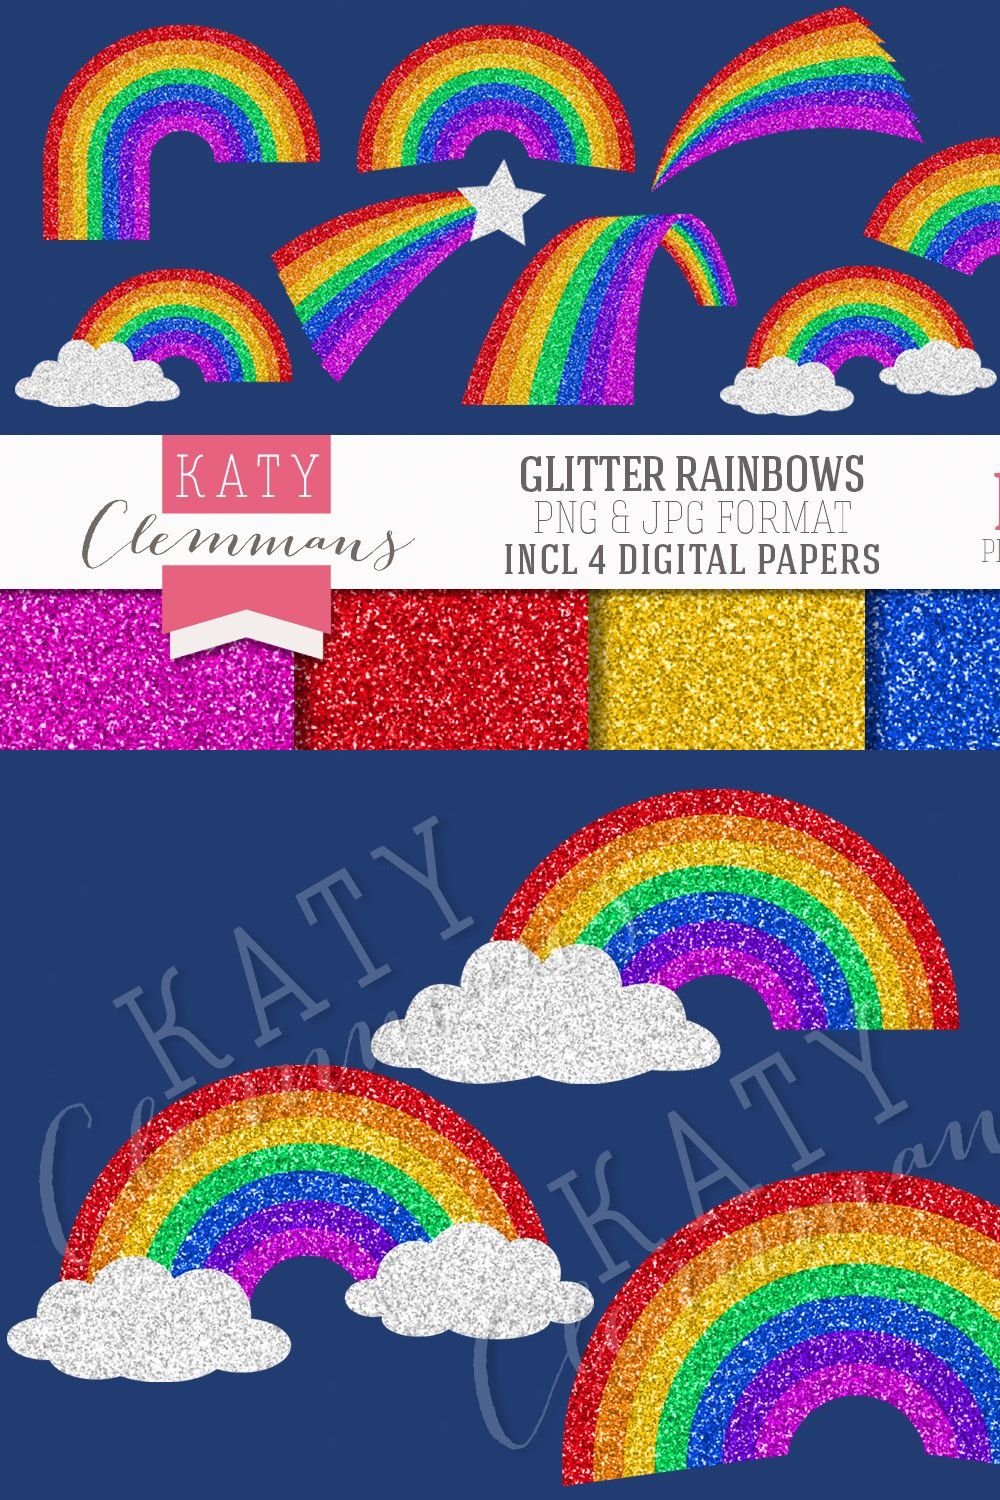 Glitter Rainbows clip art & papers pinterest preview image.